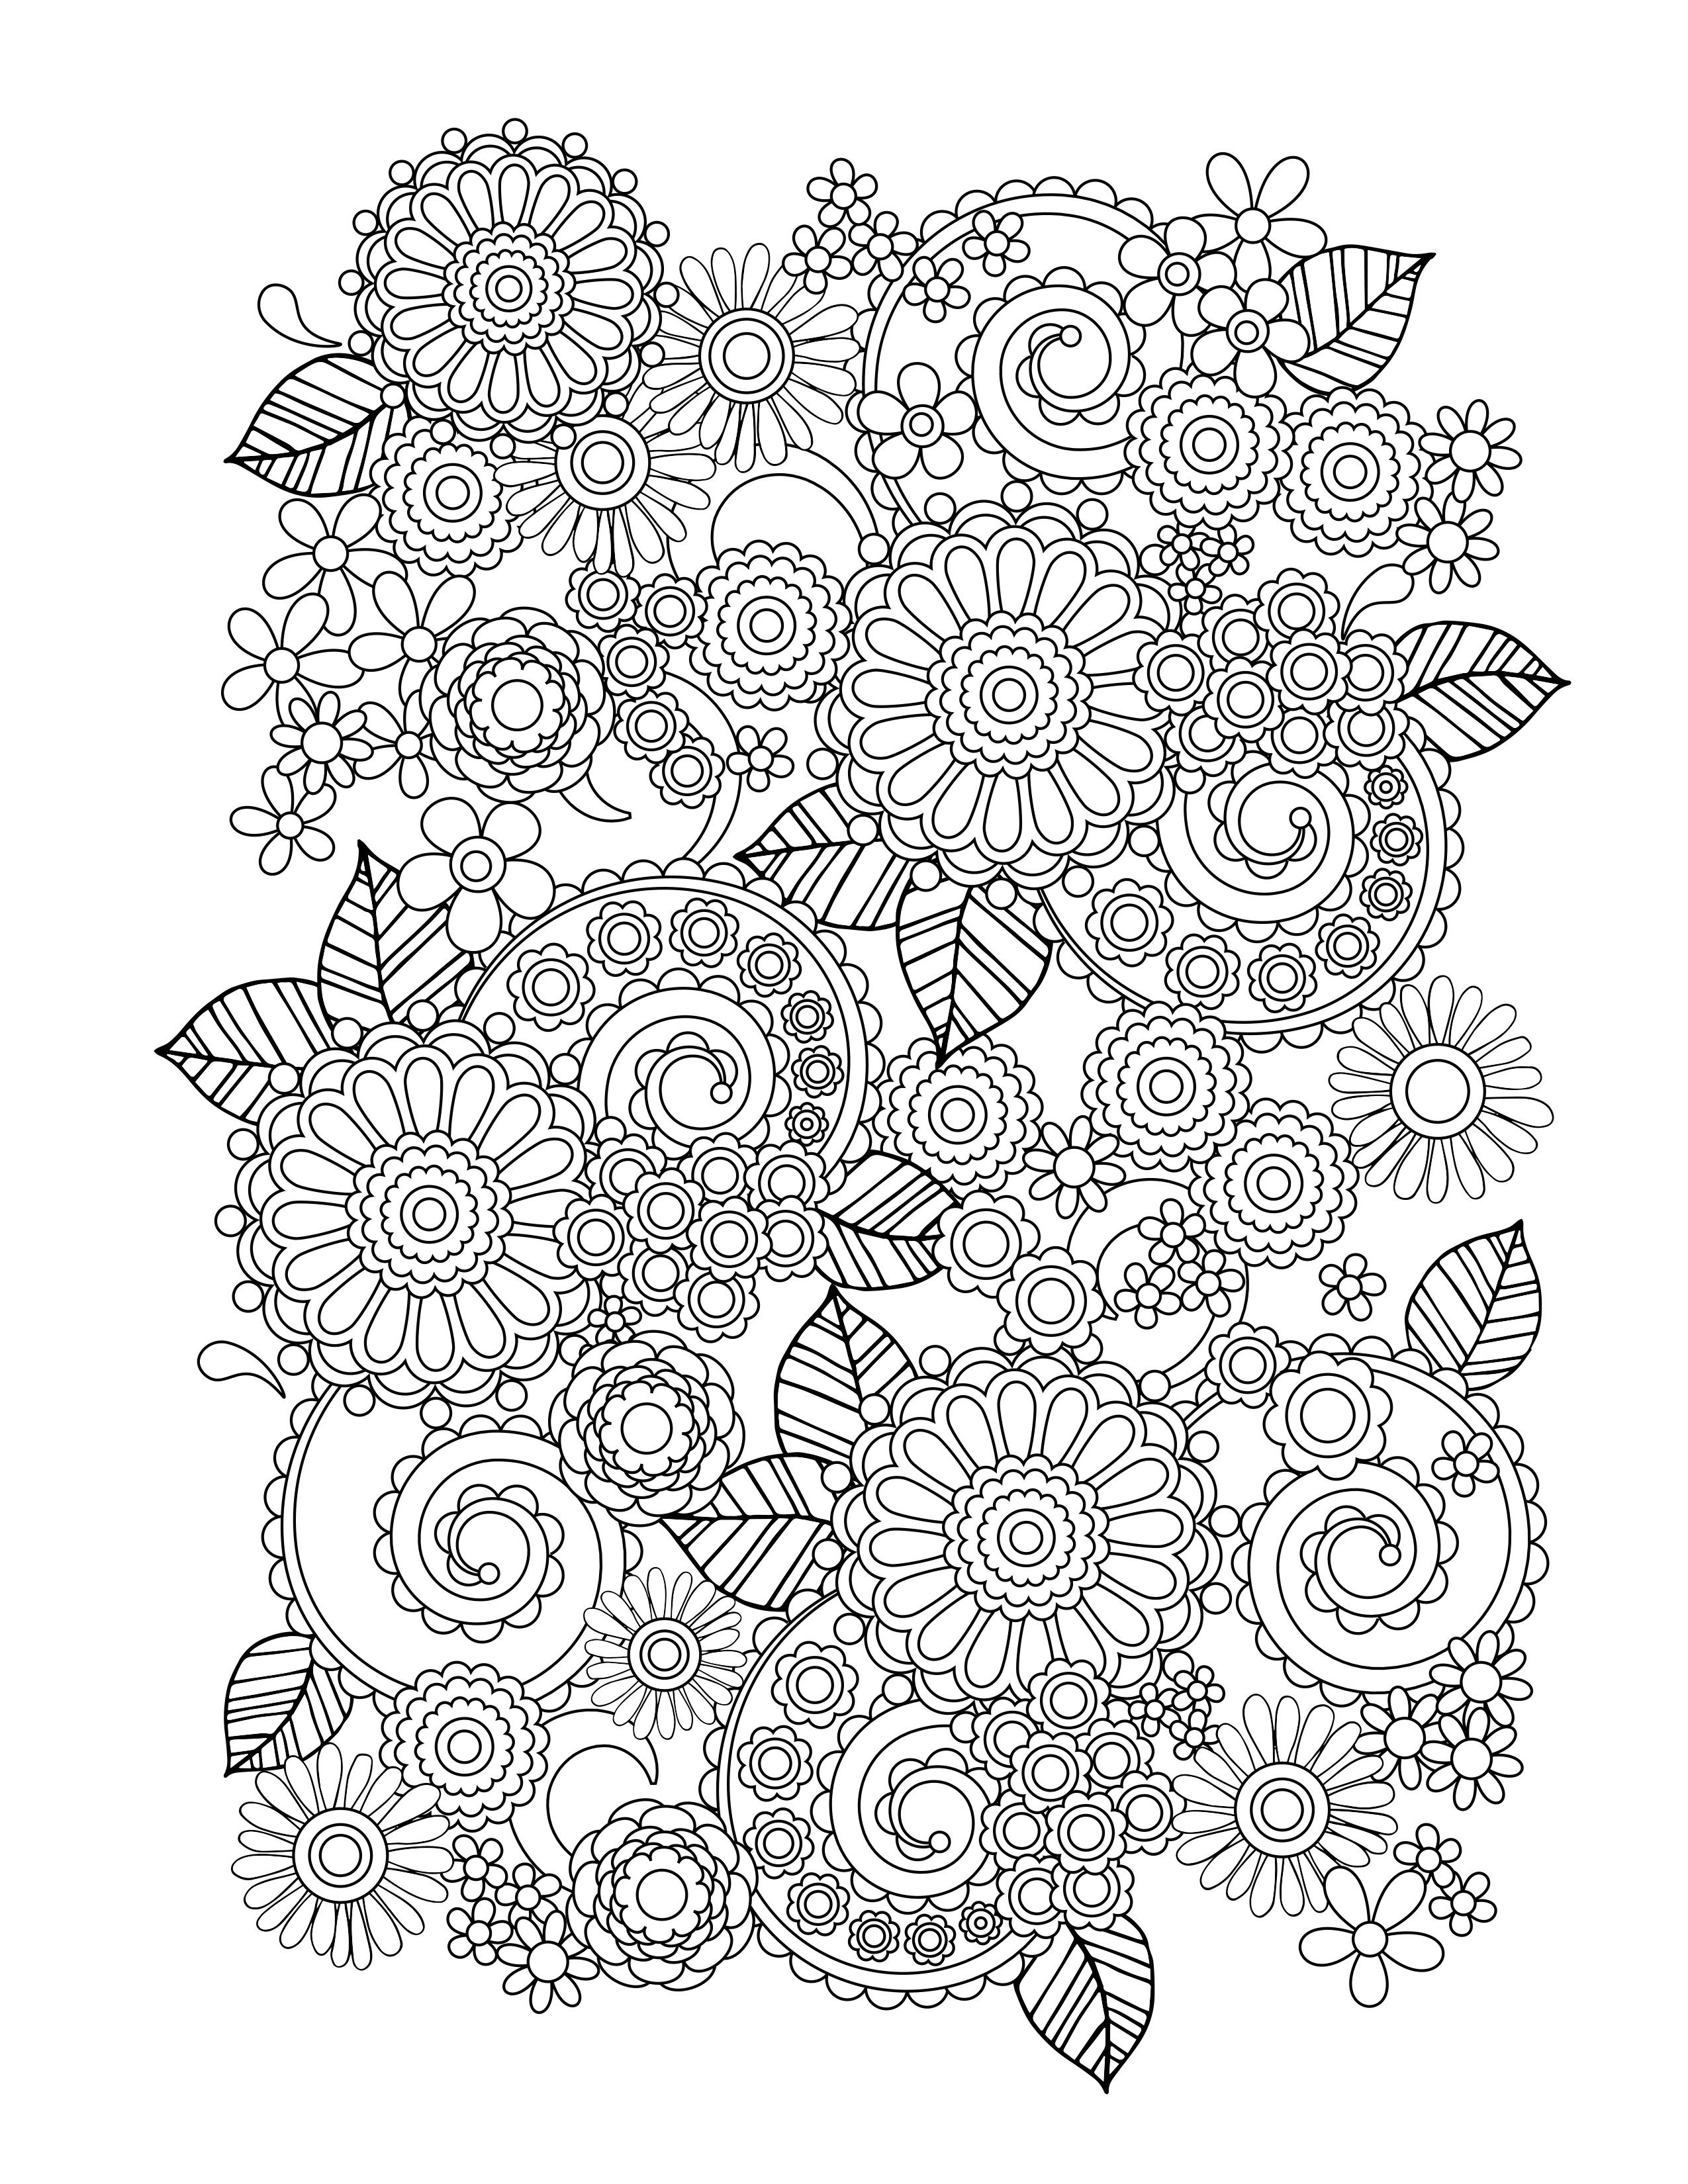 Coloring Book Free Download
 Flower Coloring Pages for Adults Best Coloring Pages For